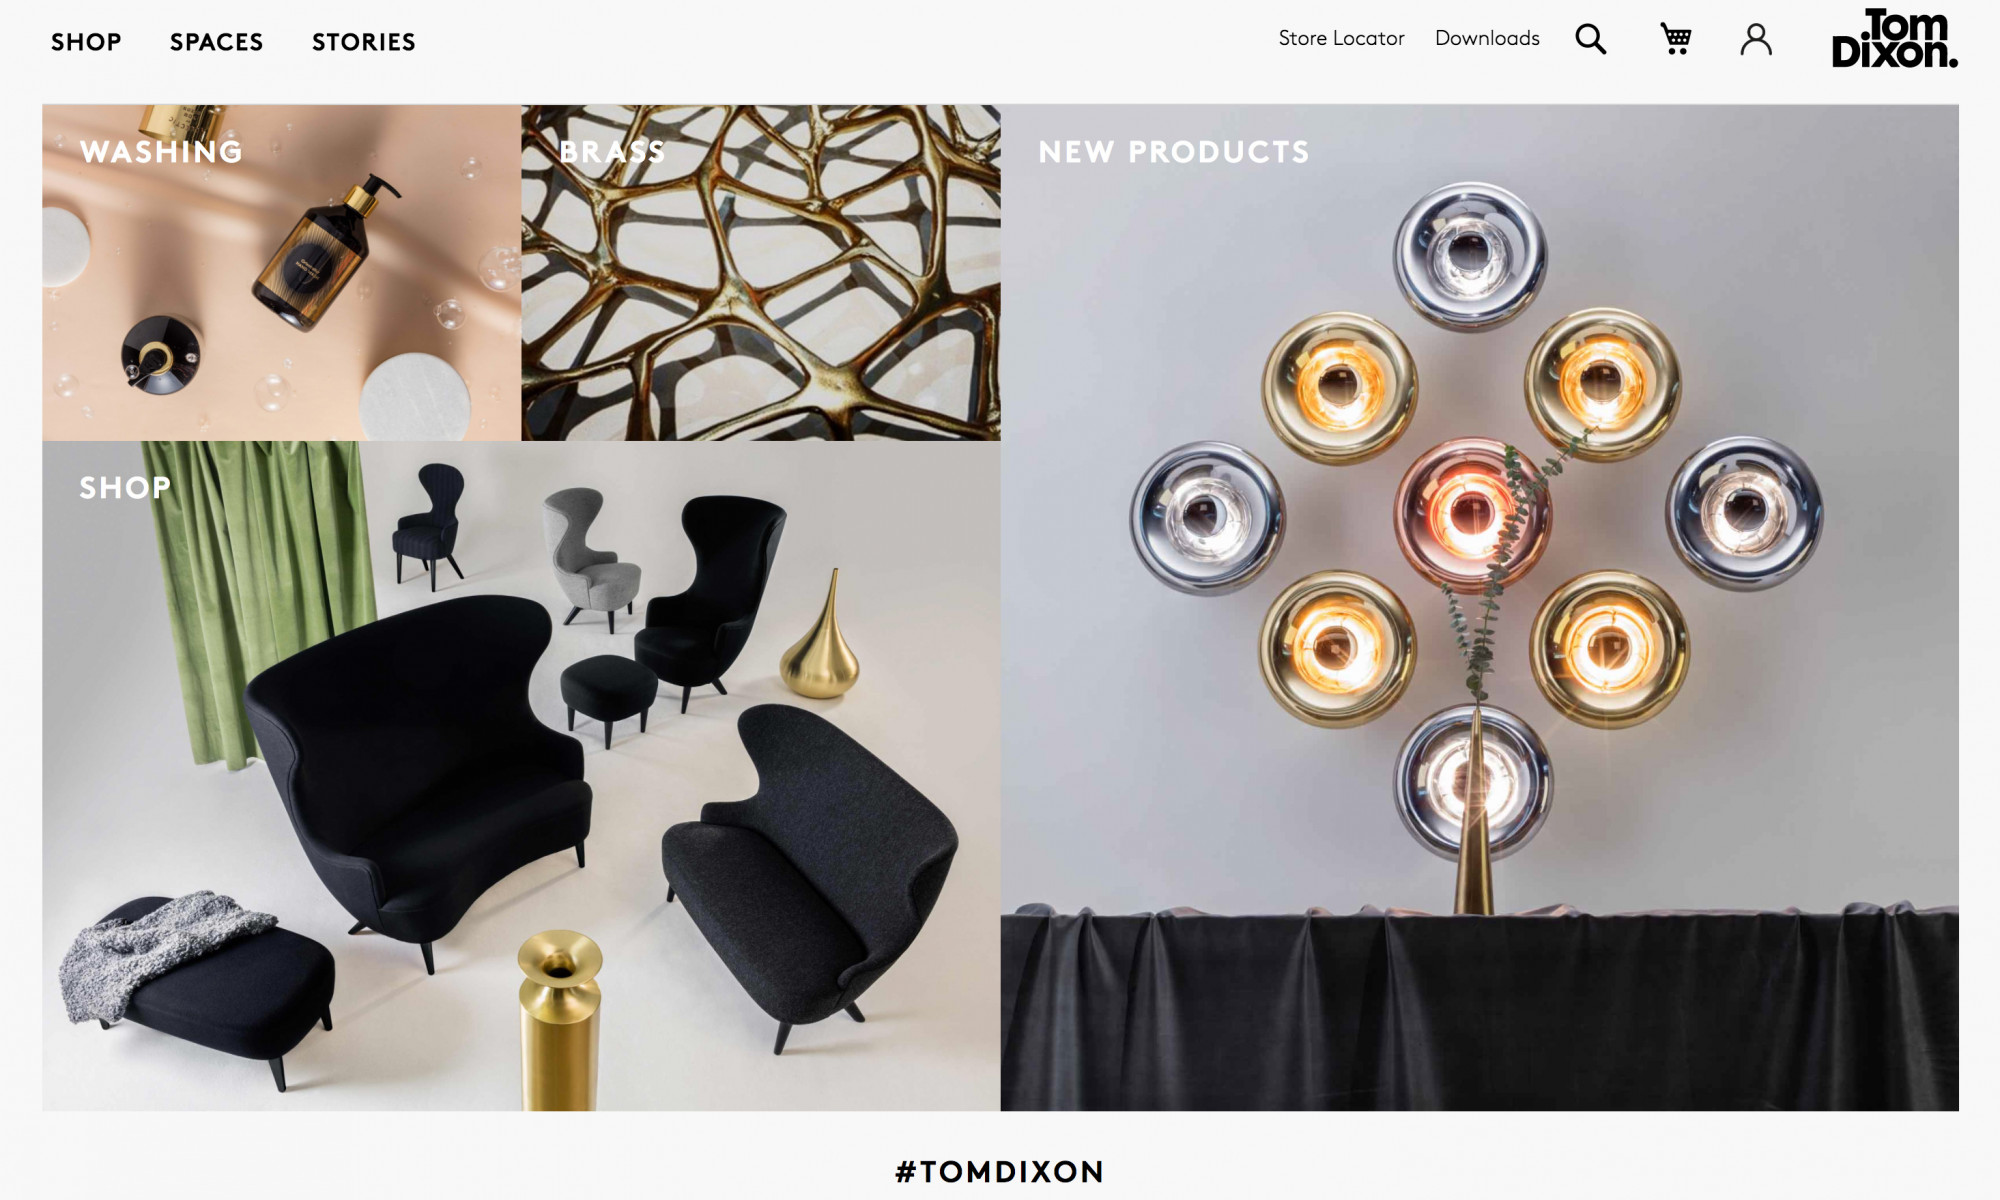 SOtech launches new Tom Dixon Magento 2 eCommerce Store, with huge success.